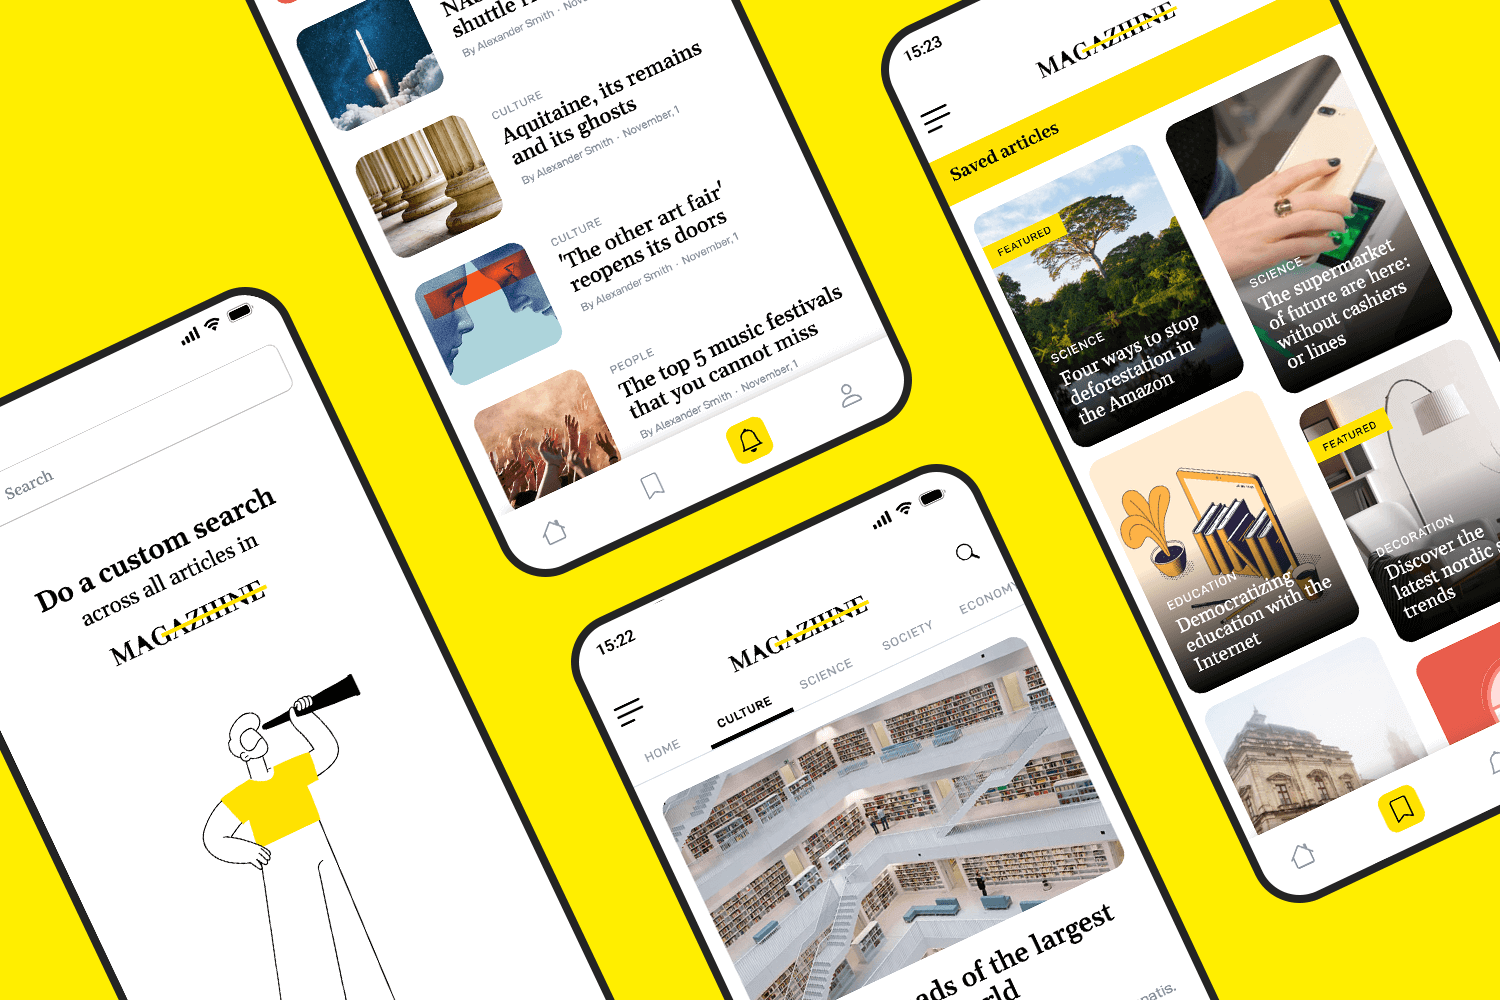 Magazine app design template with search, article list, and saved articles screens